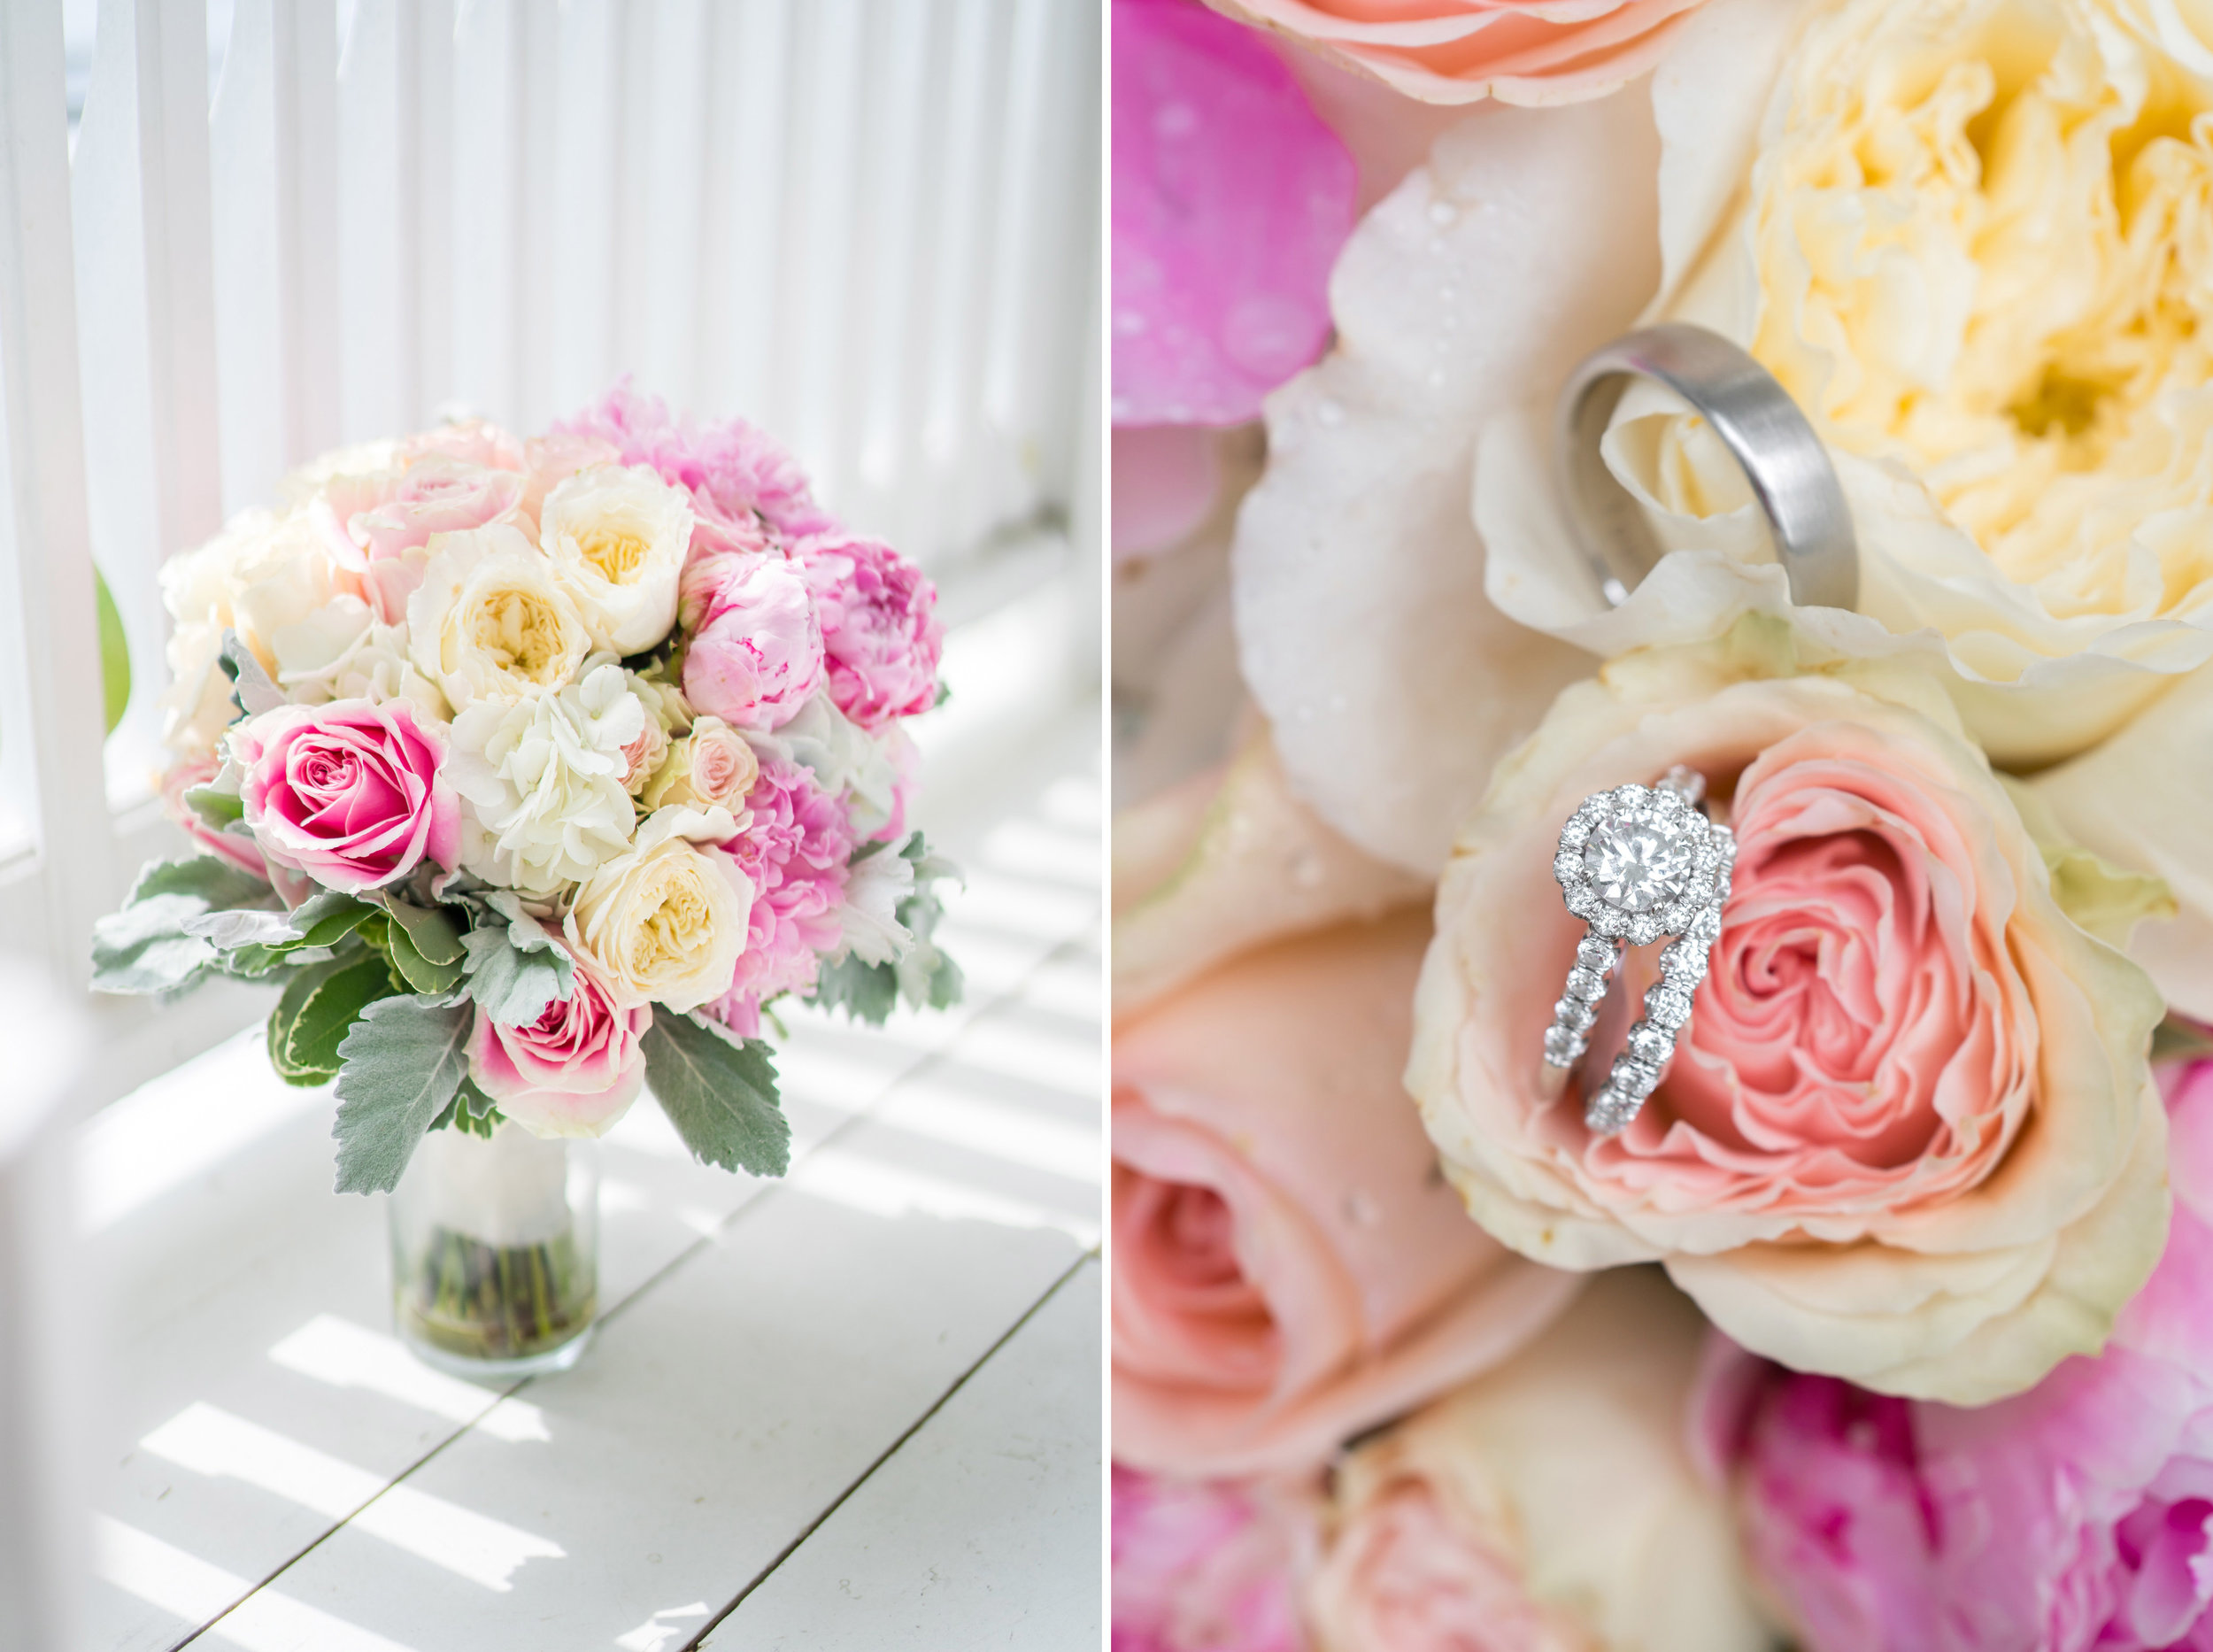 stunning rose bouquet and wedding ring at fort belvoir